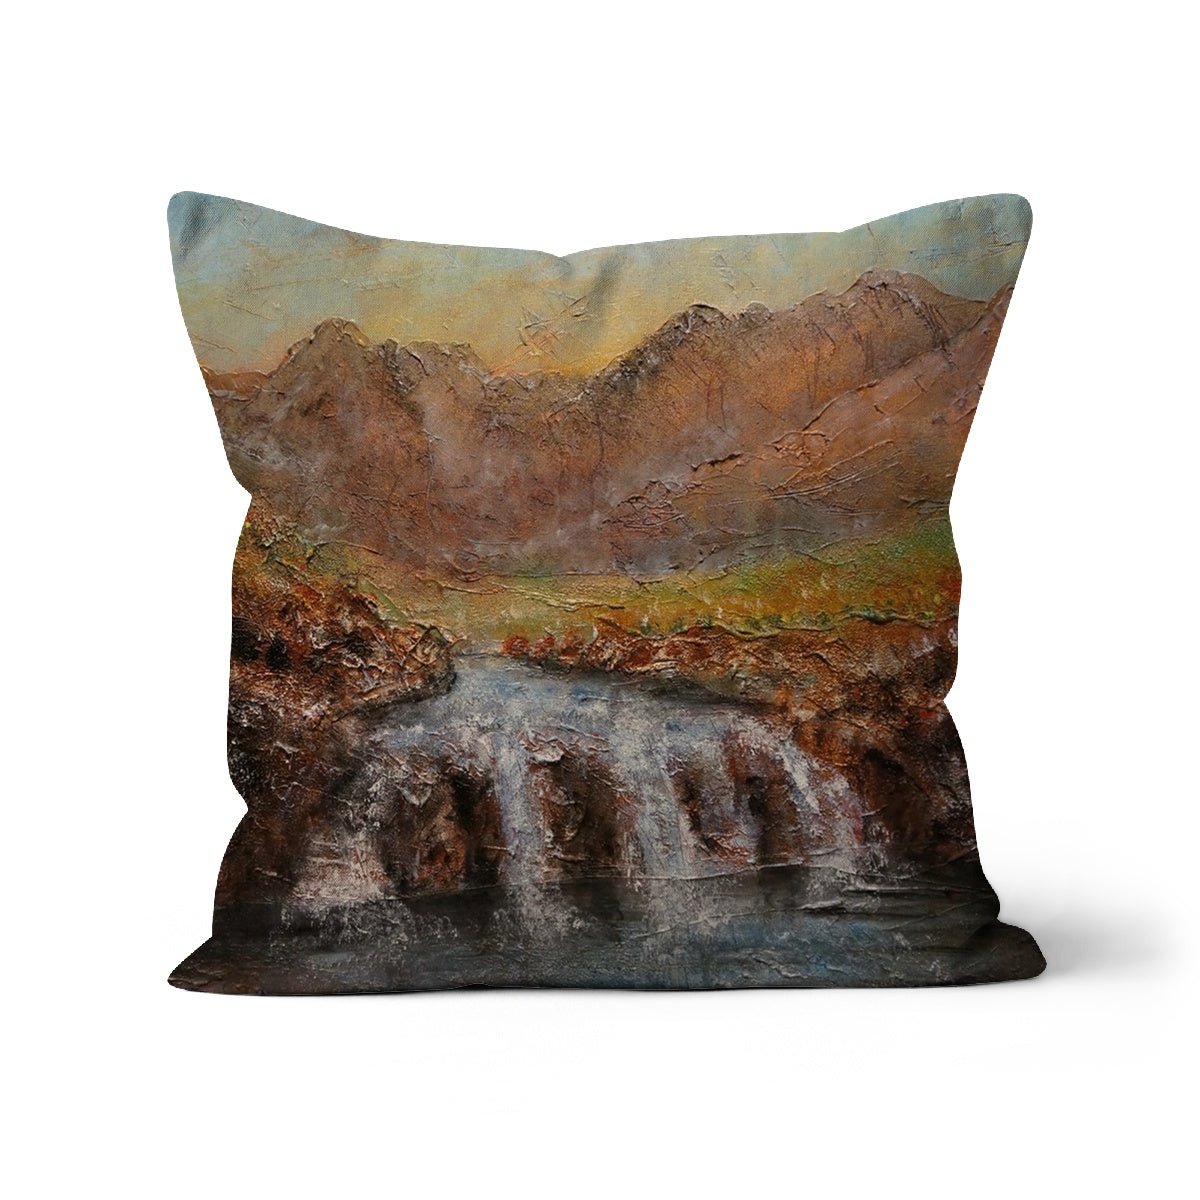 Fairy Pools Dawn Skye Art Gifts Cushion-Cushions-Skye Art Gallery-Linen-24"x24"-Paintings, Prints, Homeware, Art Gifts From Scotland By Scottish Artist Kevin Hunter